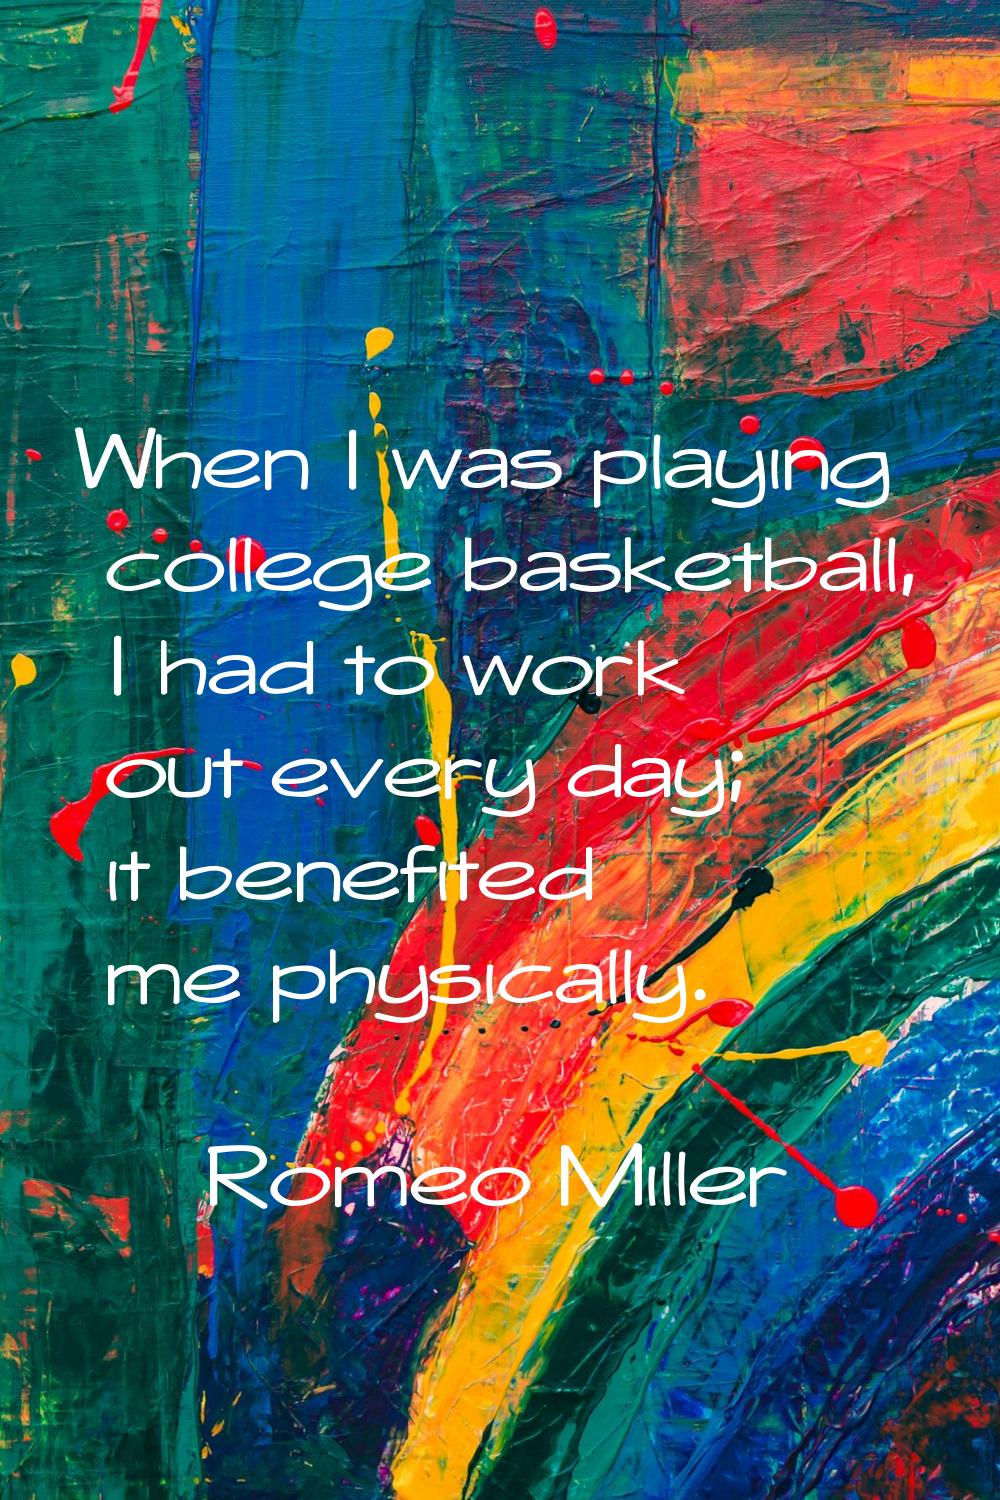 When I was playing college basketball, I had to work out every day; it benefited me physically.